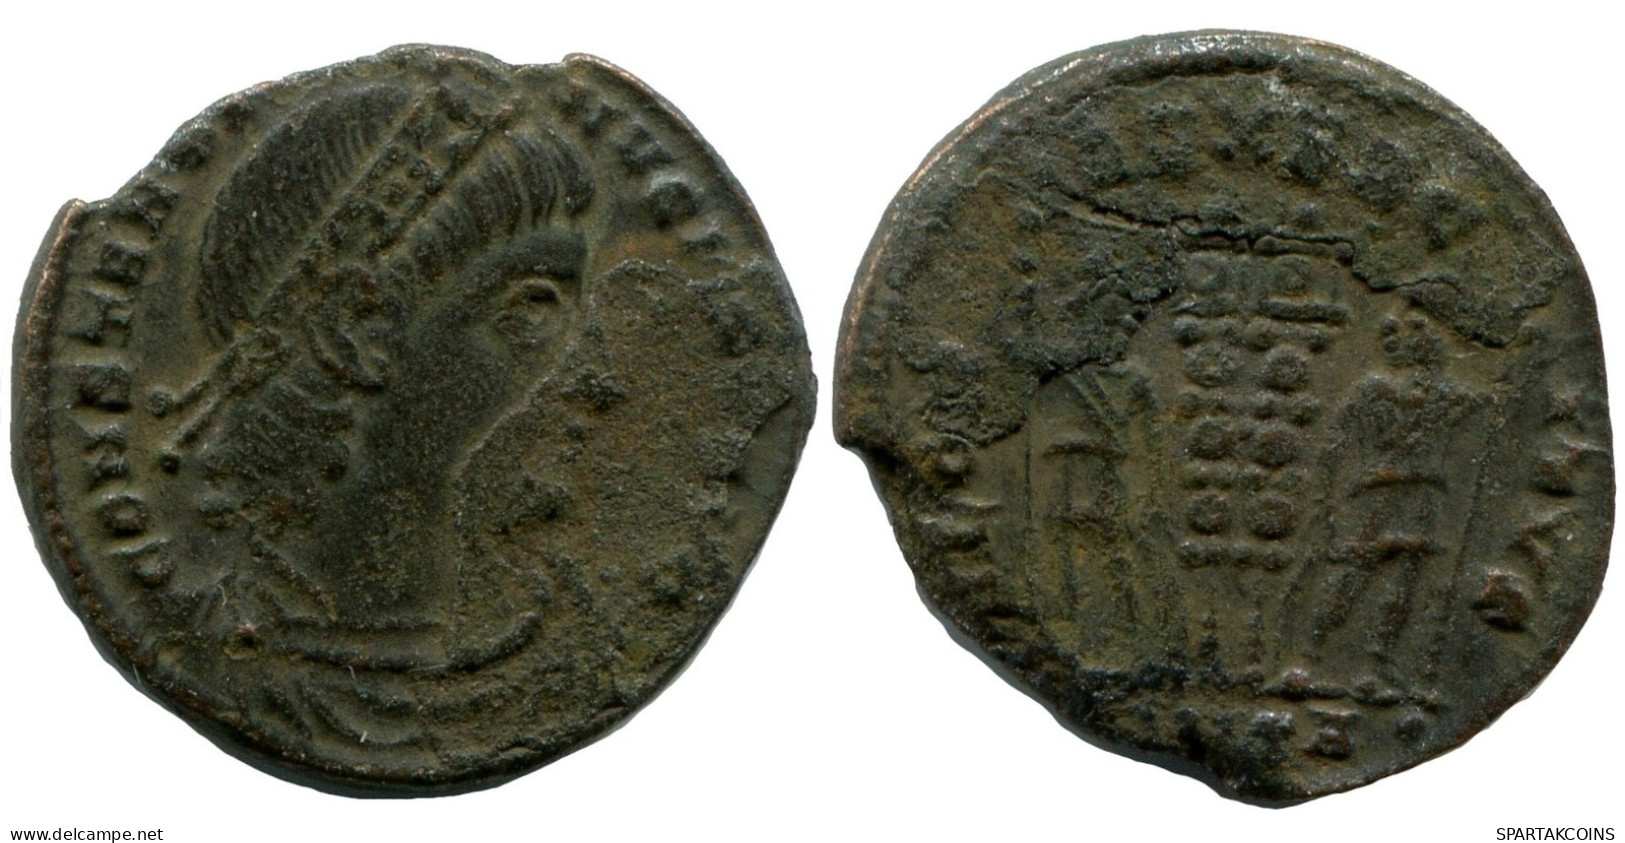 CONSTANTINE I MINTED IN CONSTANTINOPLE FOUND IN IHNASYAH HOARD #ANC10781.14.E.A - L'Empire Chrétien (307 à 363)